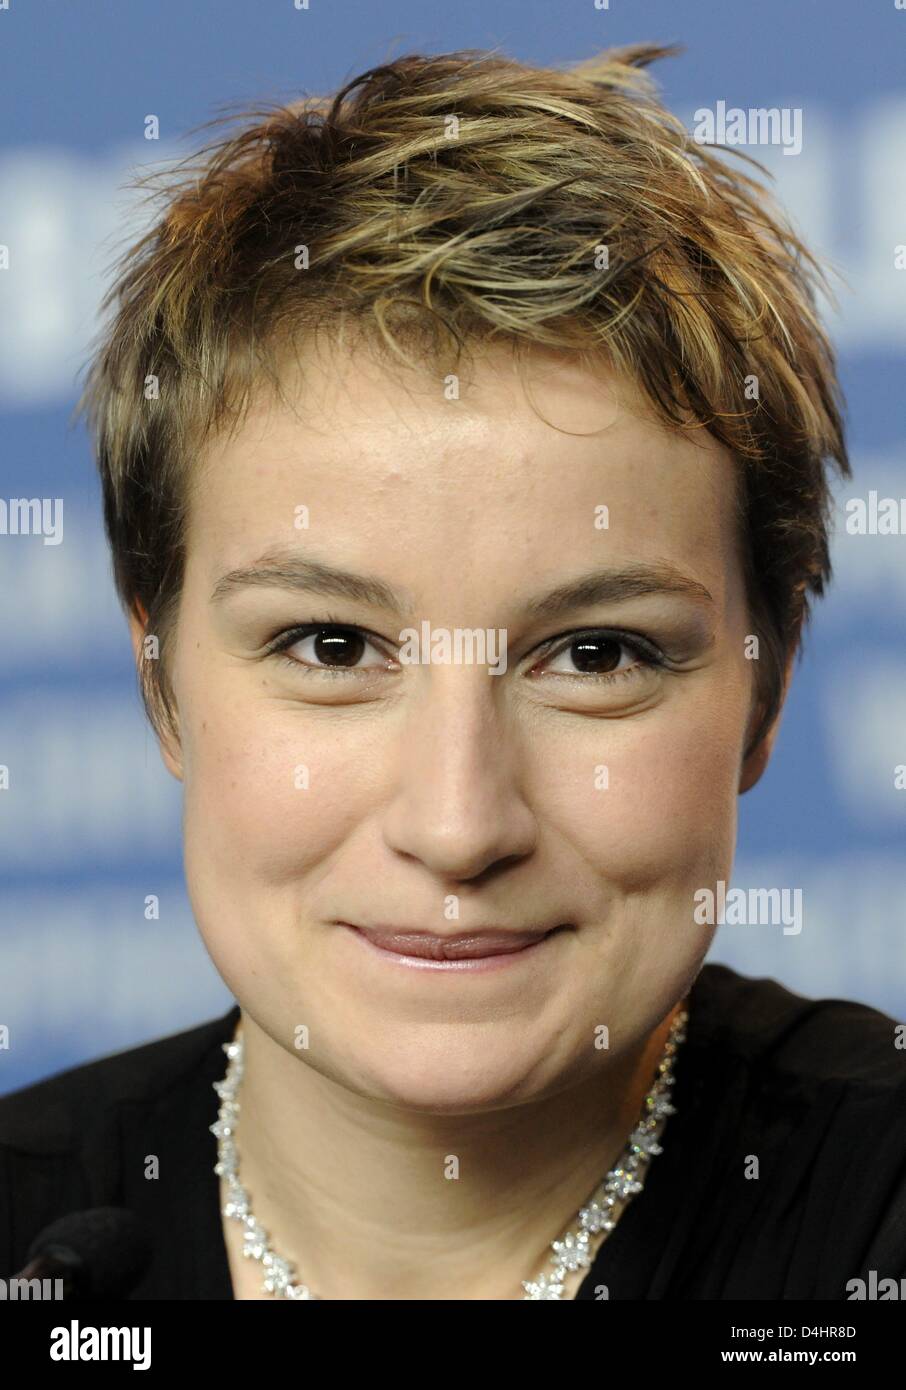 Romanian actress Anamaria Marinca pictured during the press conference on her film ?Storm? at the 59th Berlin International Film Festival in Berlin, Germany, 07 February 2009. The film runs in Competition, a total of 18 films compete for the Silver and Golden Bears of the 59th Berlinale. Photo: TIM BRAKEMEIER Stock Photo